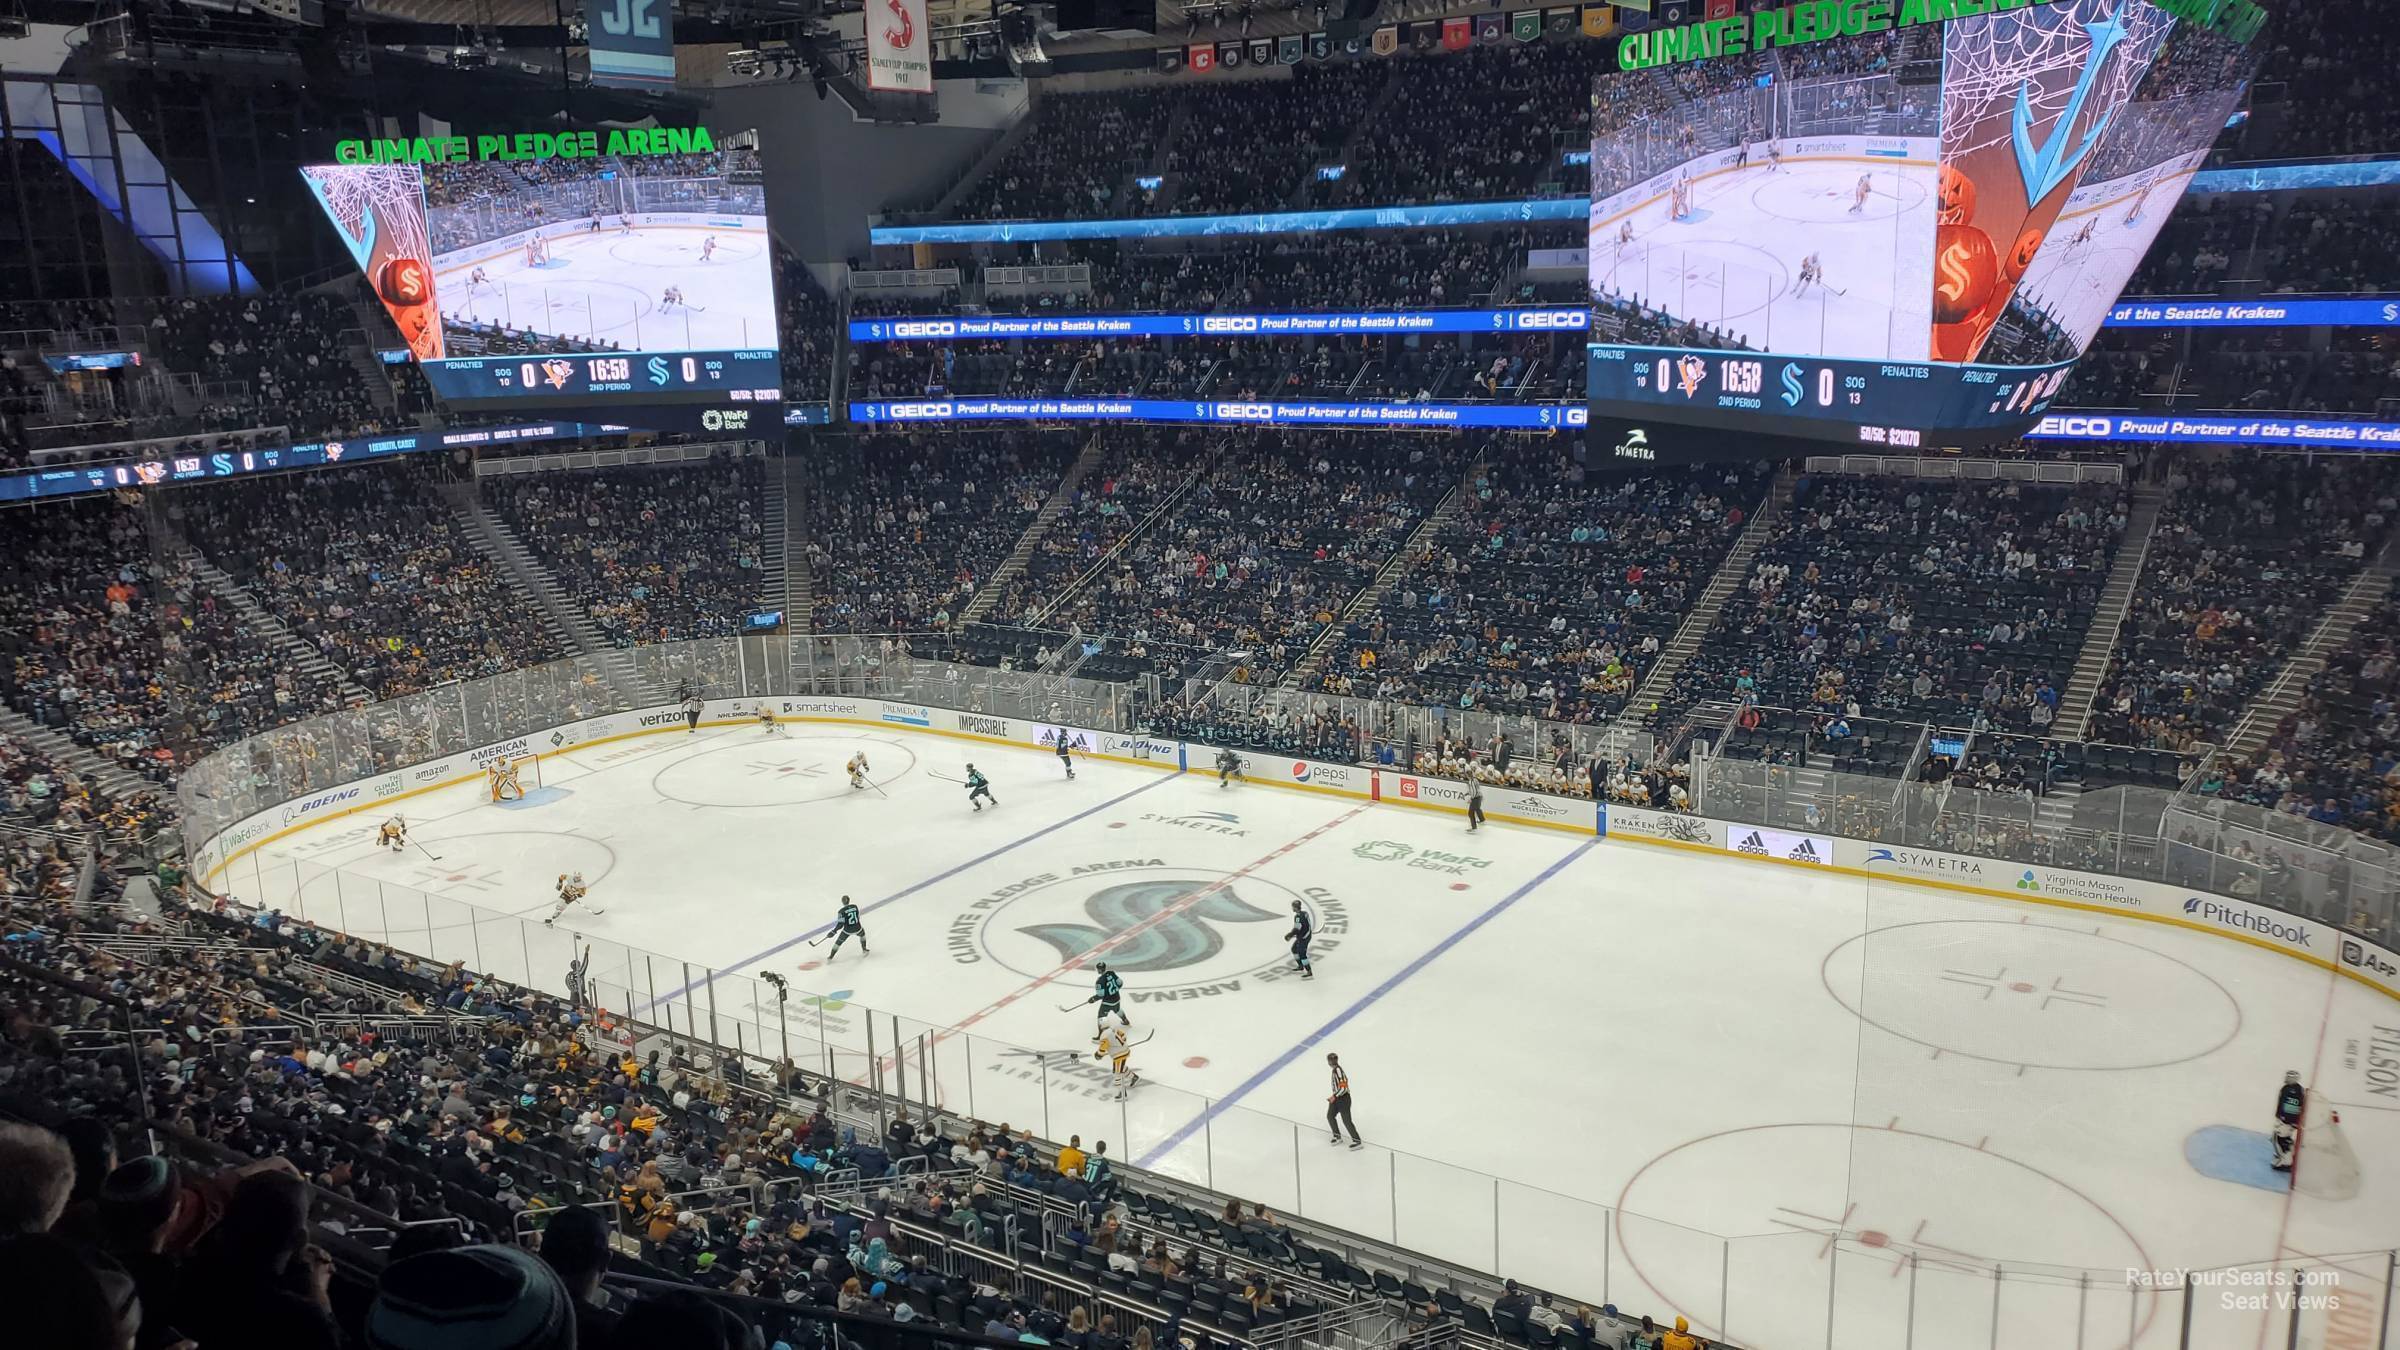 section 112, row bar seat view  for hockey - climate pledge arena